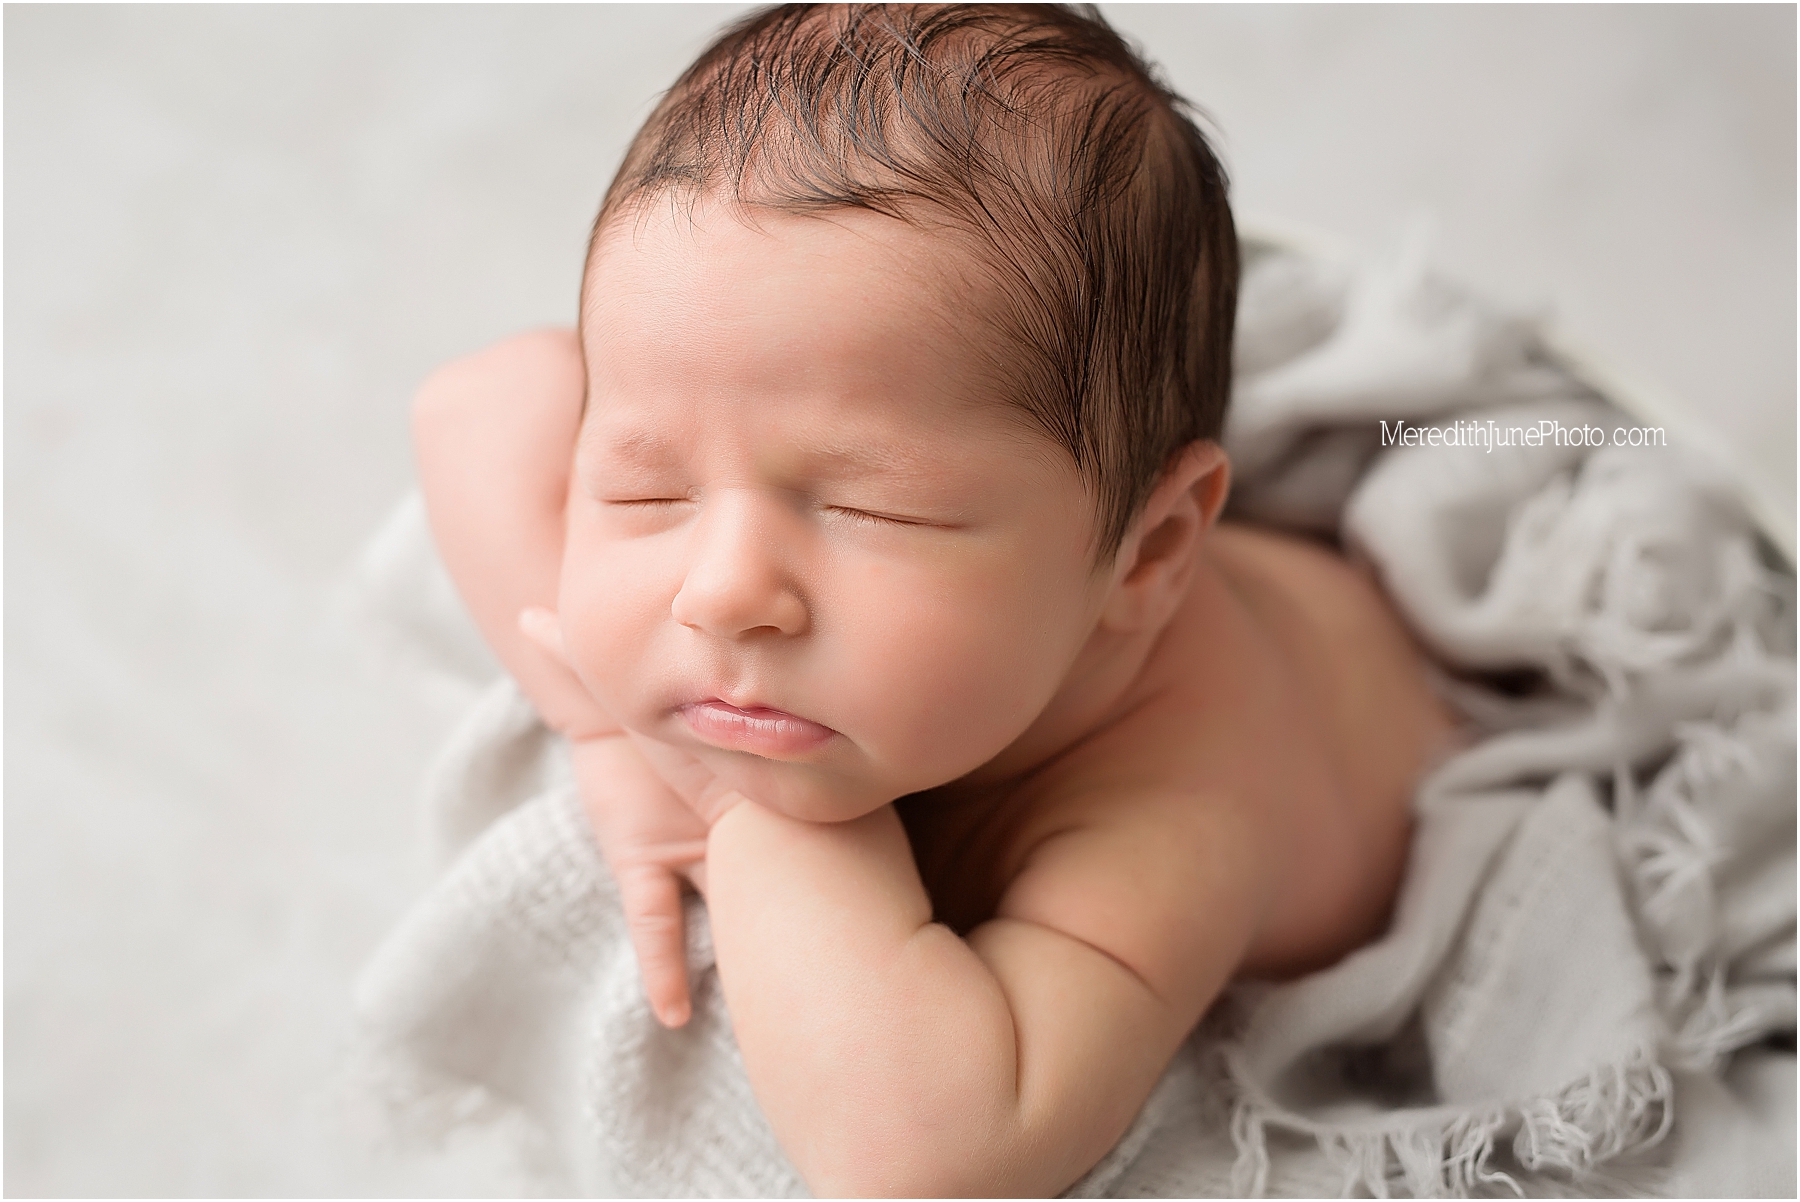 Newborn photo session for baby boys